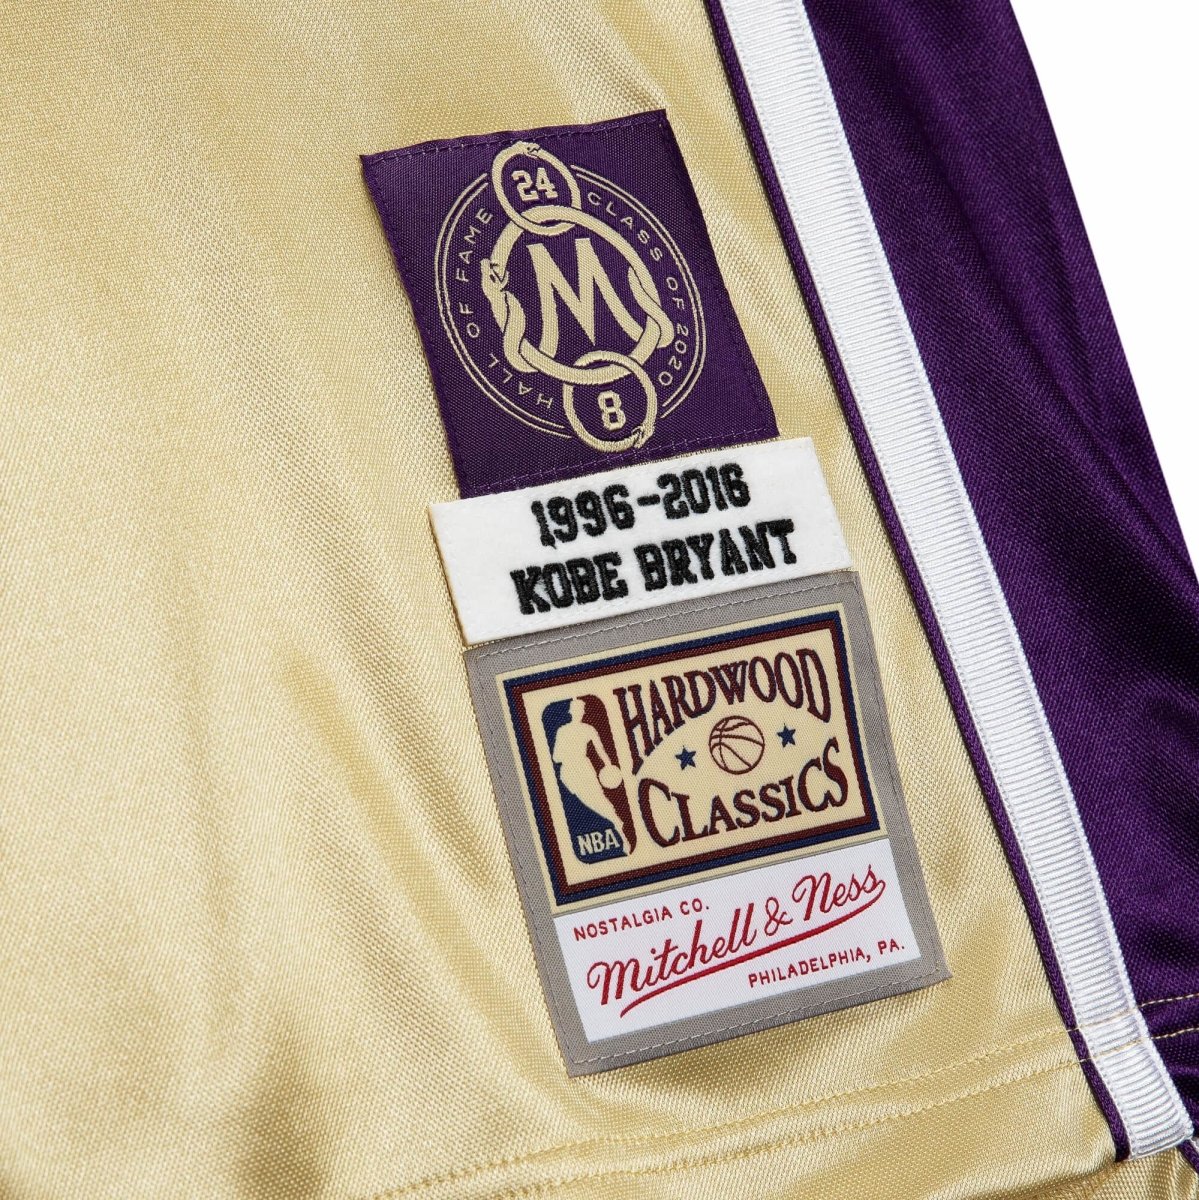 Mitchell & Ness Authentic Hall of Fame #24 Kobe Bryant Los Angeles Lakers 1996-2016 Jersey - STNDRD ATHLETIC CO.